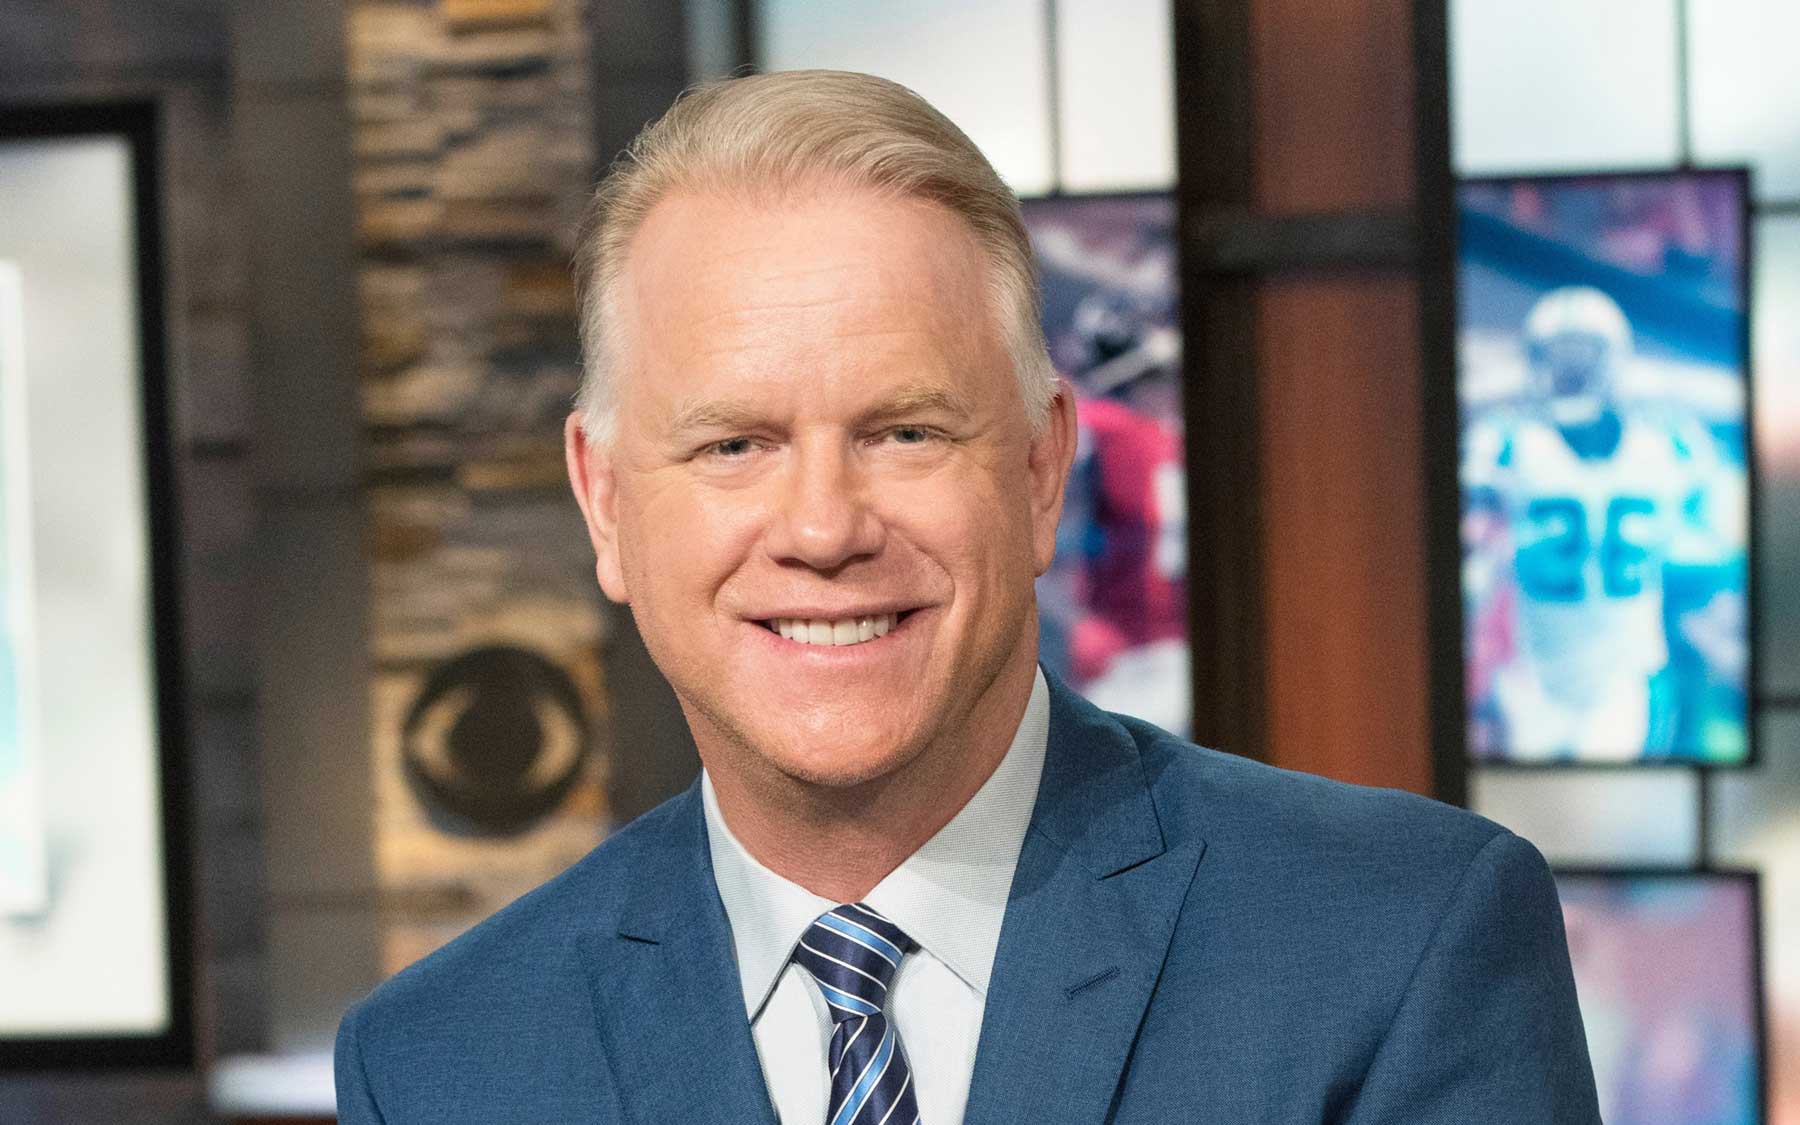 Boomer Esiason could end up helping Brian Flores case. As we all know Boomer is a host on WFAN, in New York and during a sports show